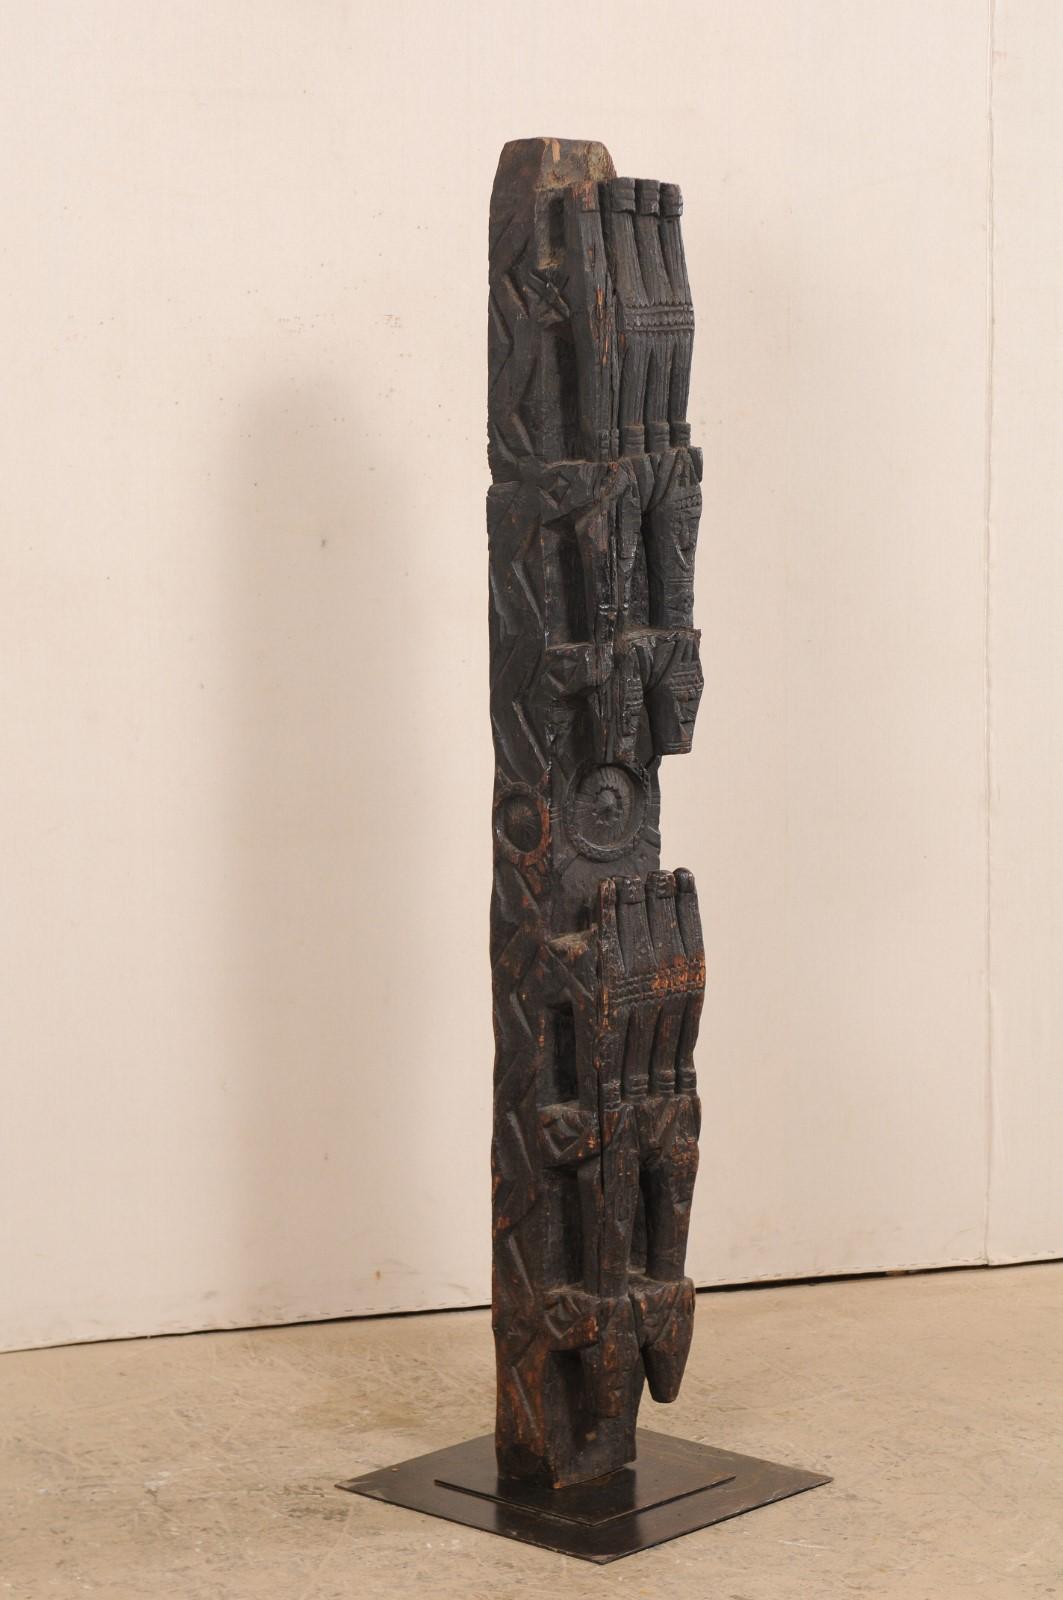 An early 20th century carved wood support beam from central Asia, custom mounted on iron stand. This antique wooden support beam was once a lintel which adorns the upper doorway of a central Asian home. It has been hand carved with three-dimensional